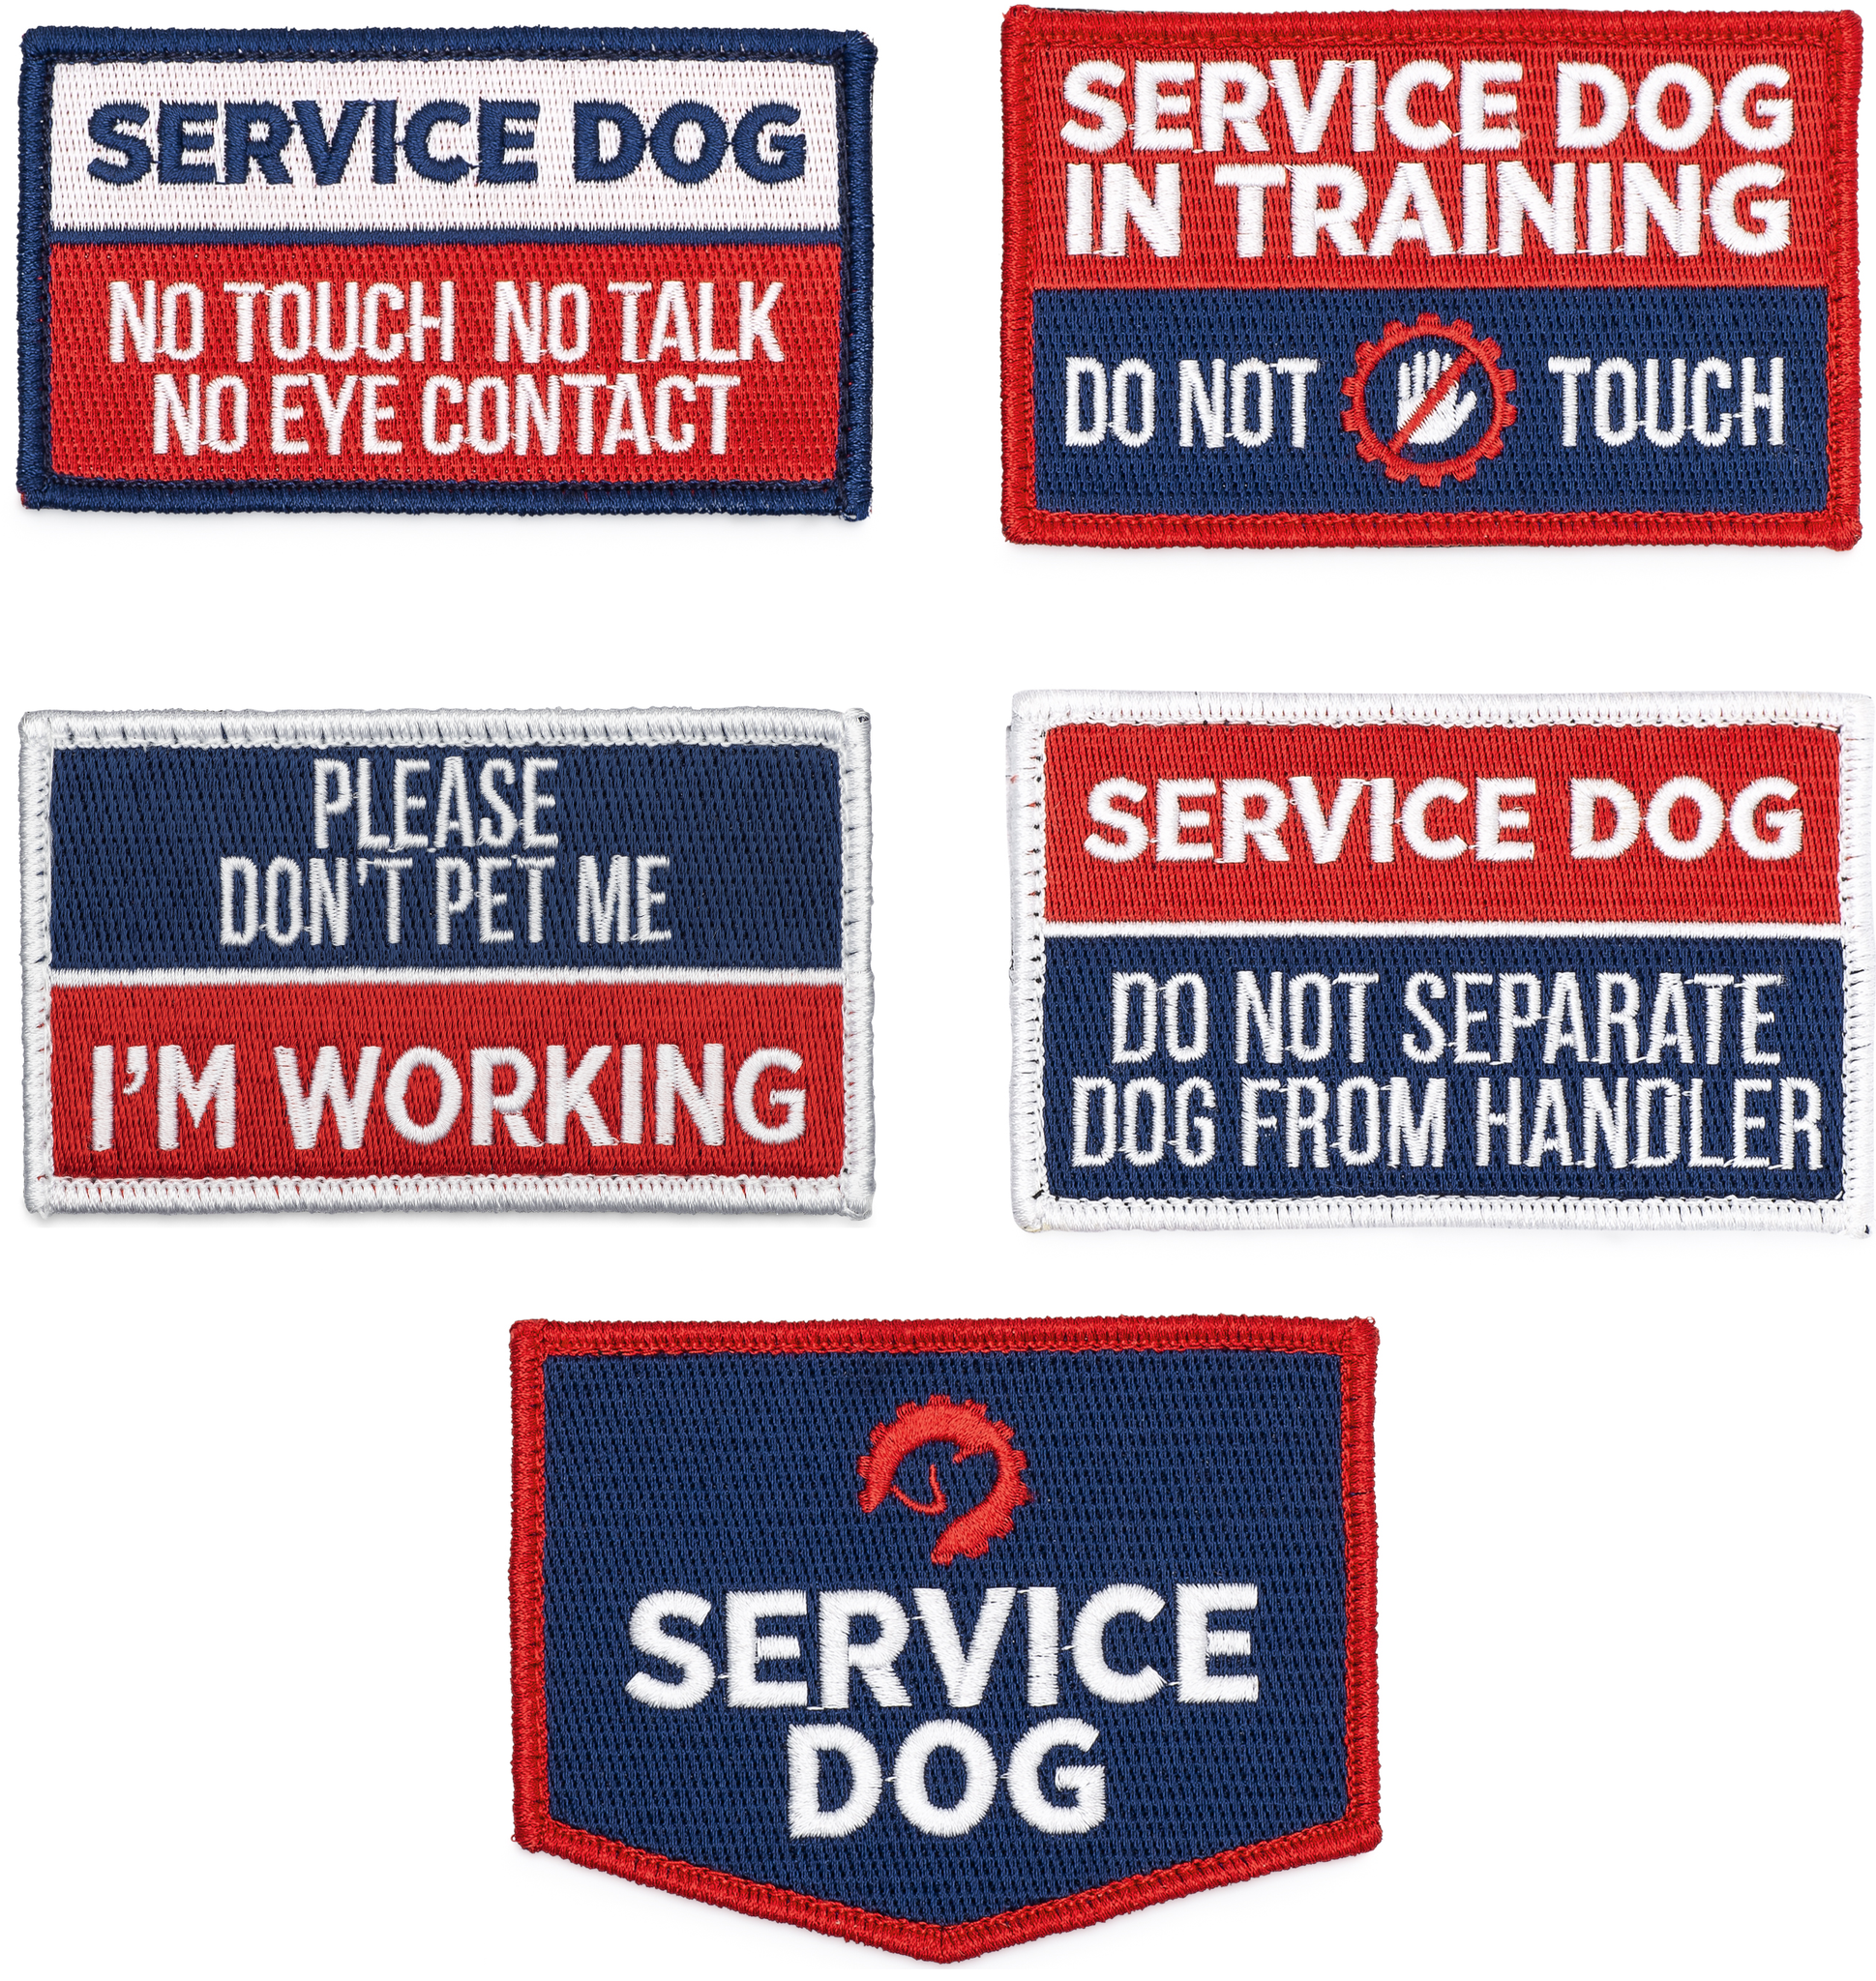 Embroidered Service Dog In Training Dog Patches with Hook/Loop